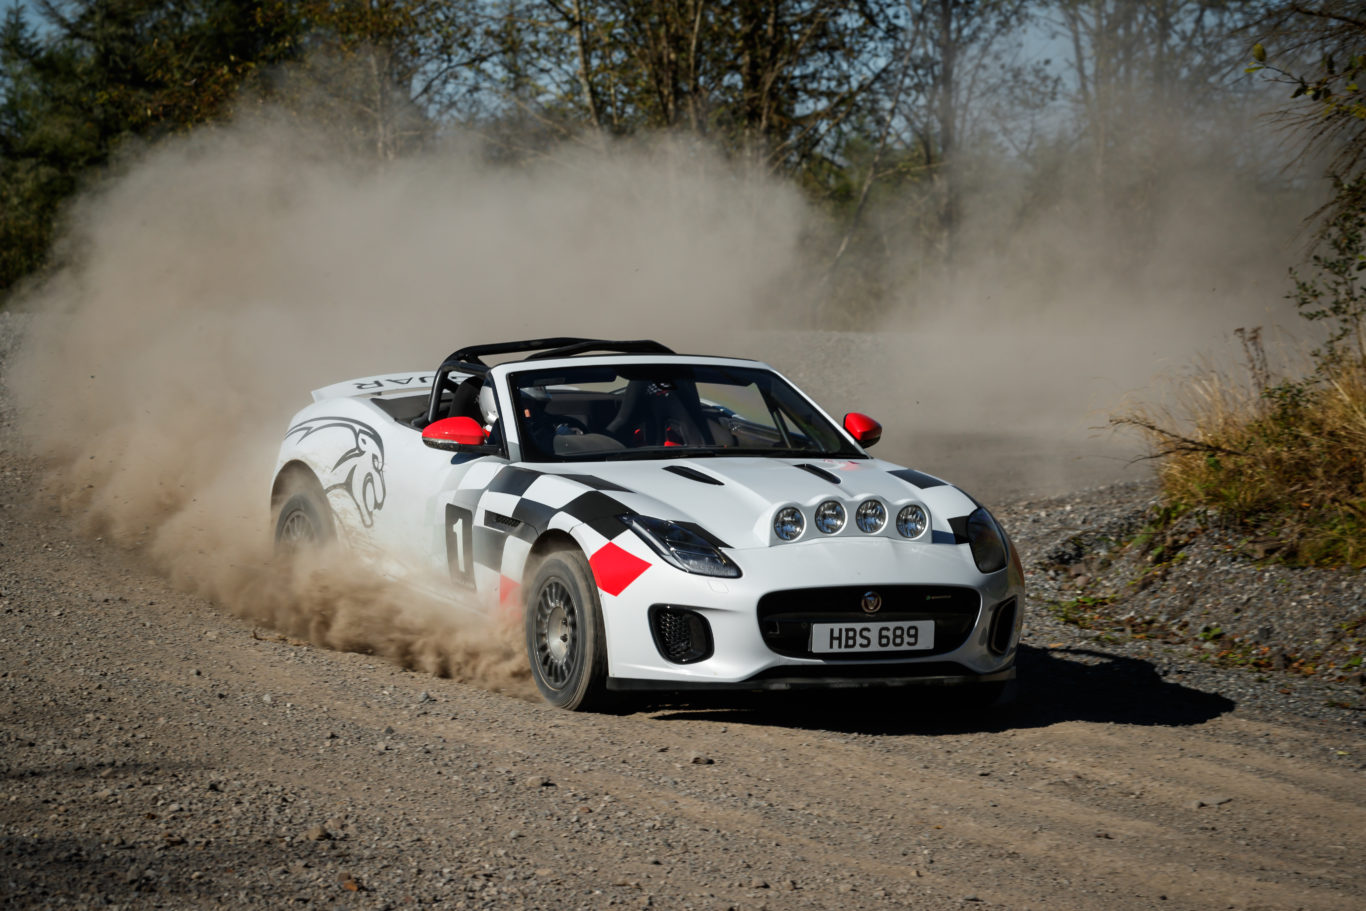 A four-cylinder engine powers the F-Type rally car